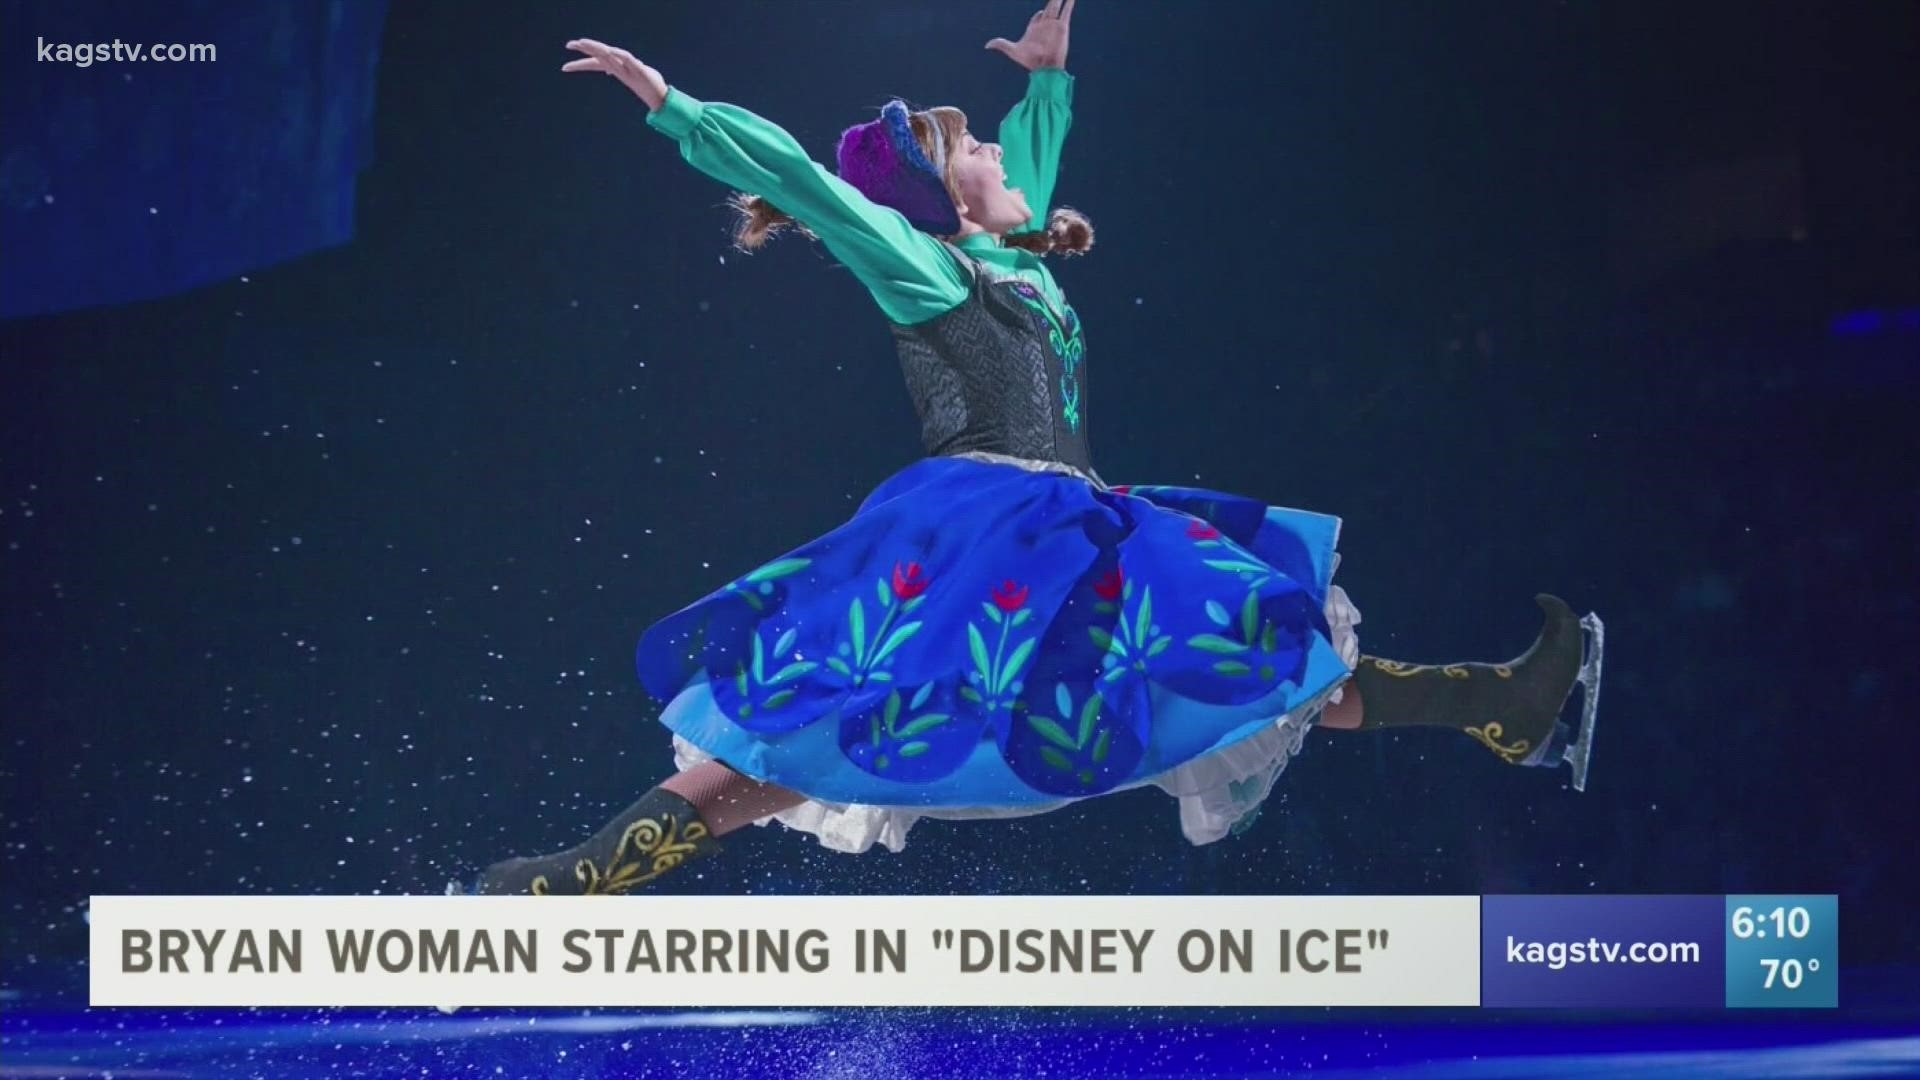 Jamie Hathaway has been dreaming of performing with Disney since she was four years old.